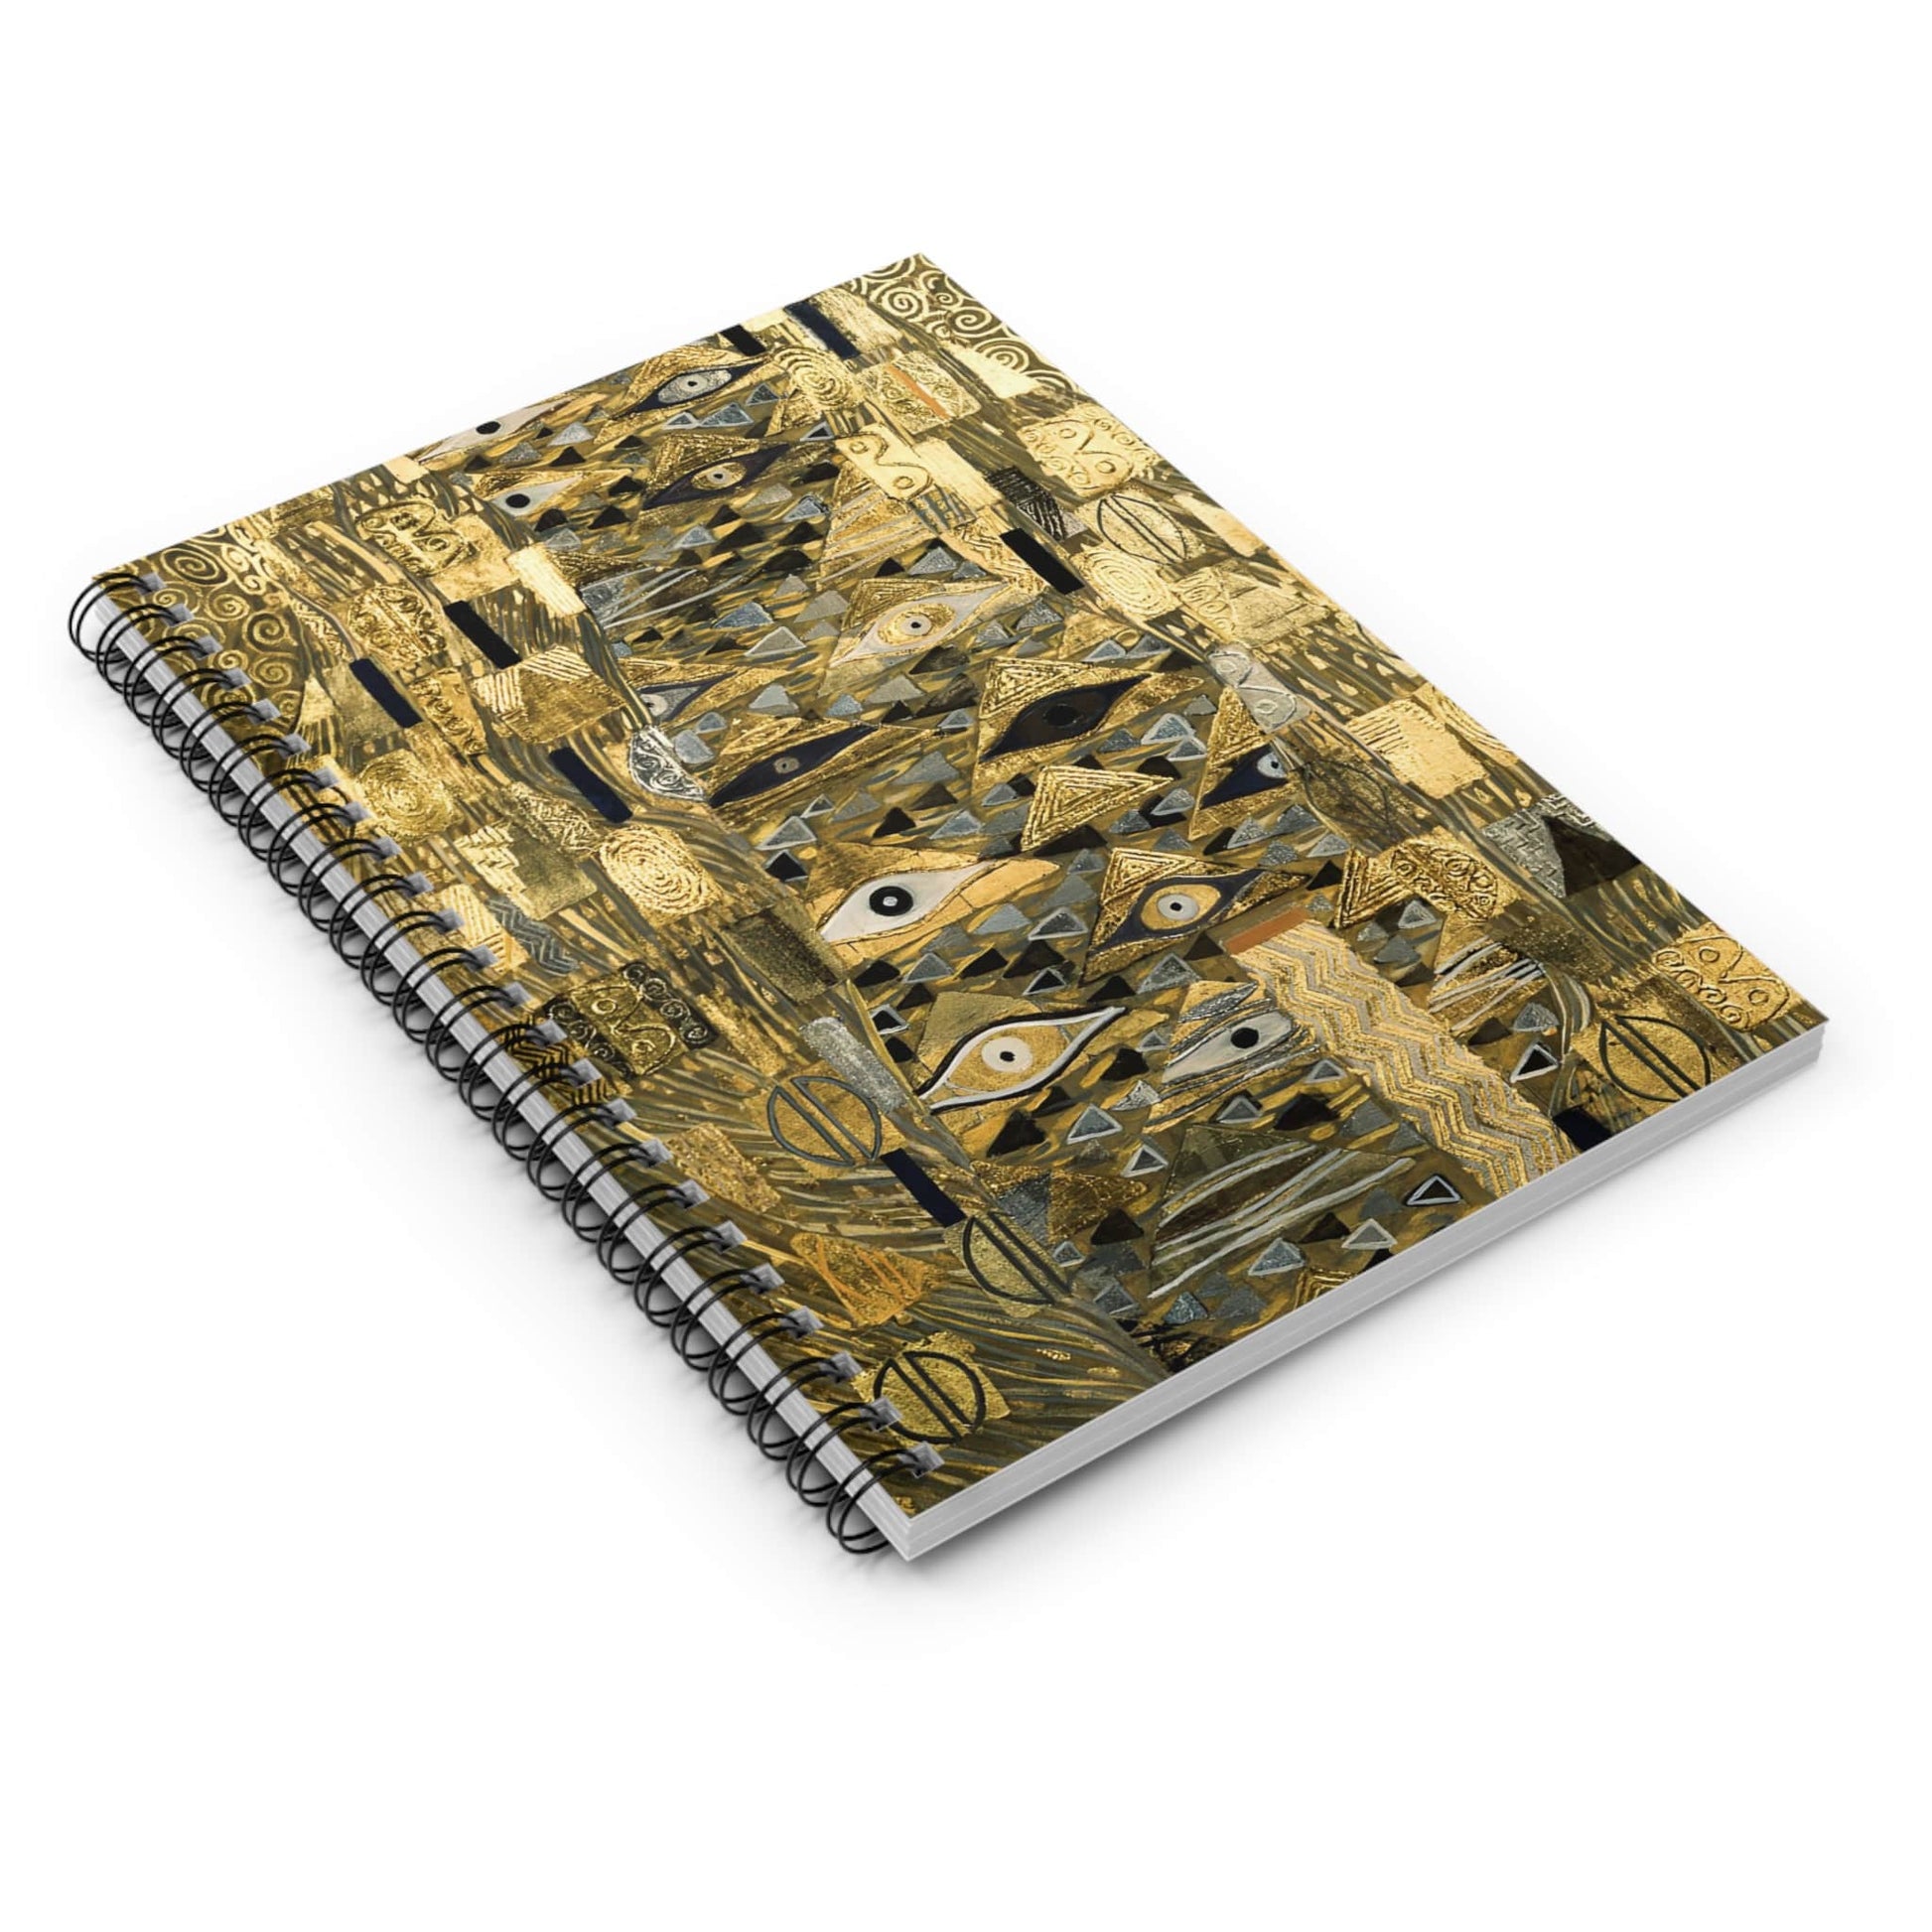 The Lady in Gold Spiral Notebook Laying Flat on White Surface